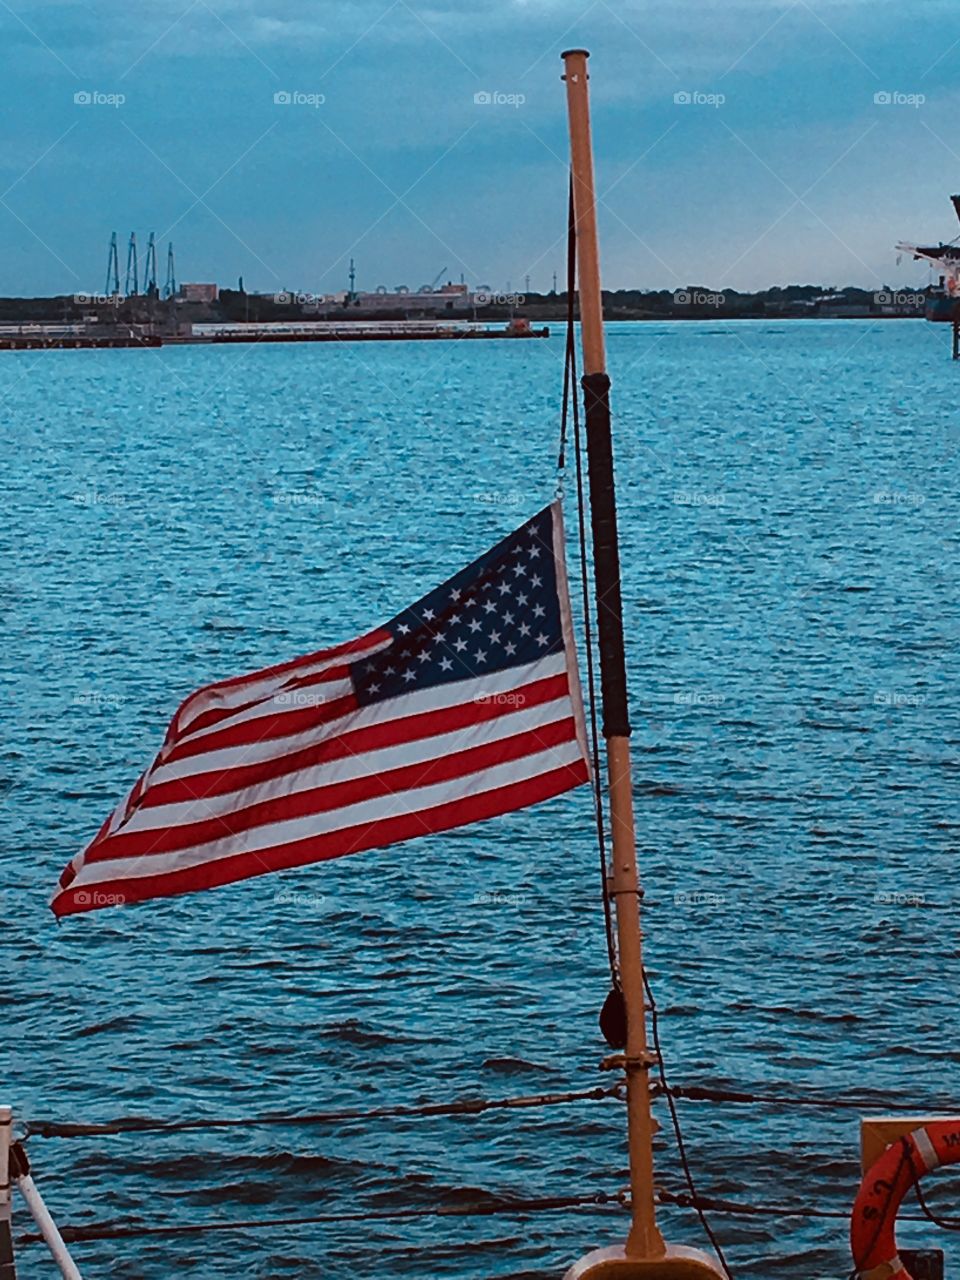 National Ensign proudly flying at half-mast. USCG. 